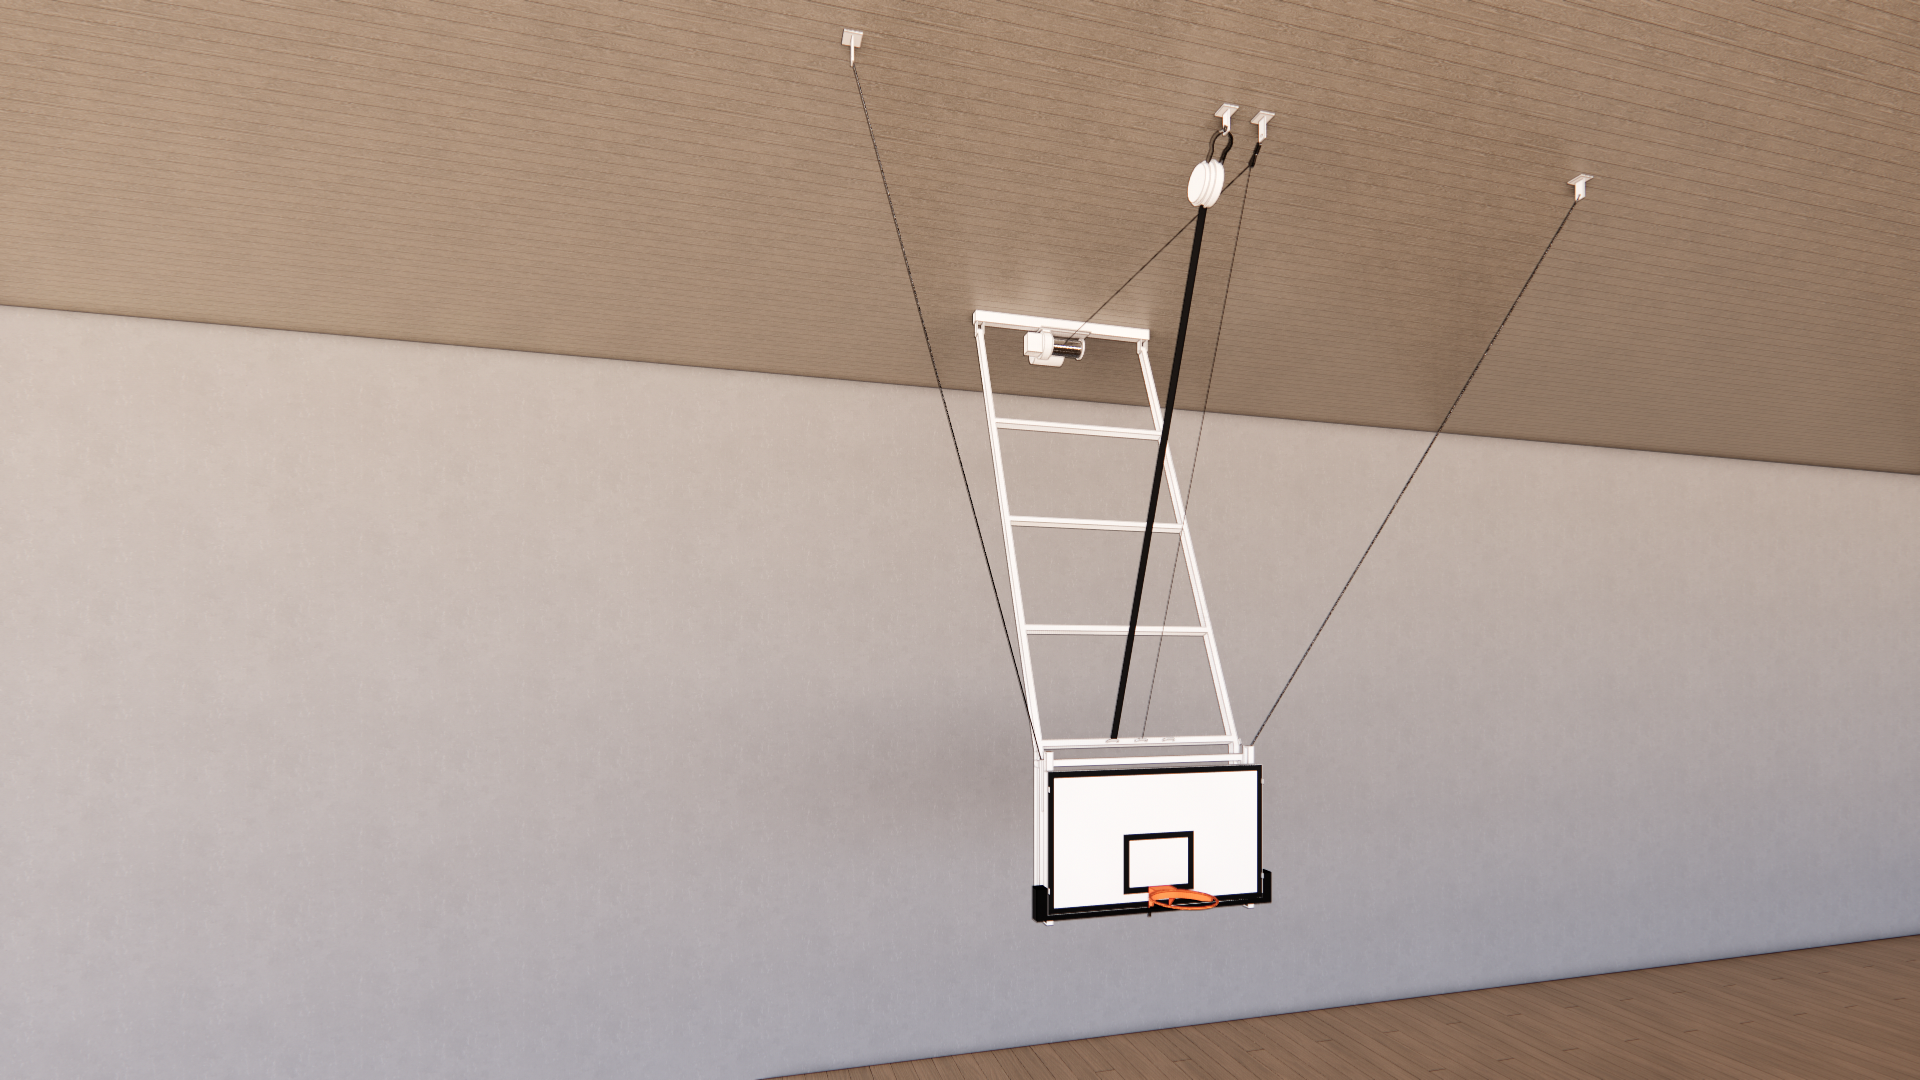 A Revit model of a ceiling-hung Gymleader basketball hoop in a gym 